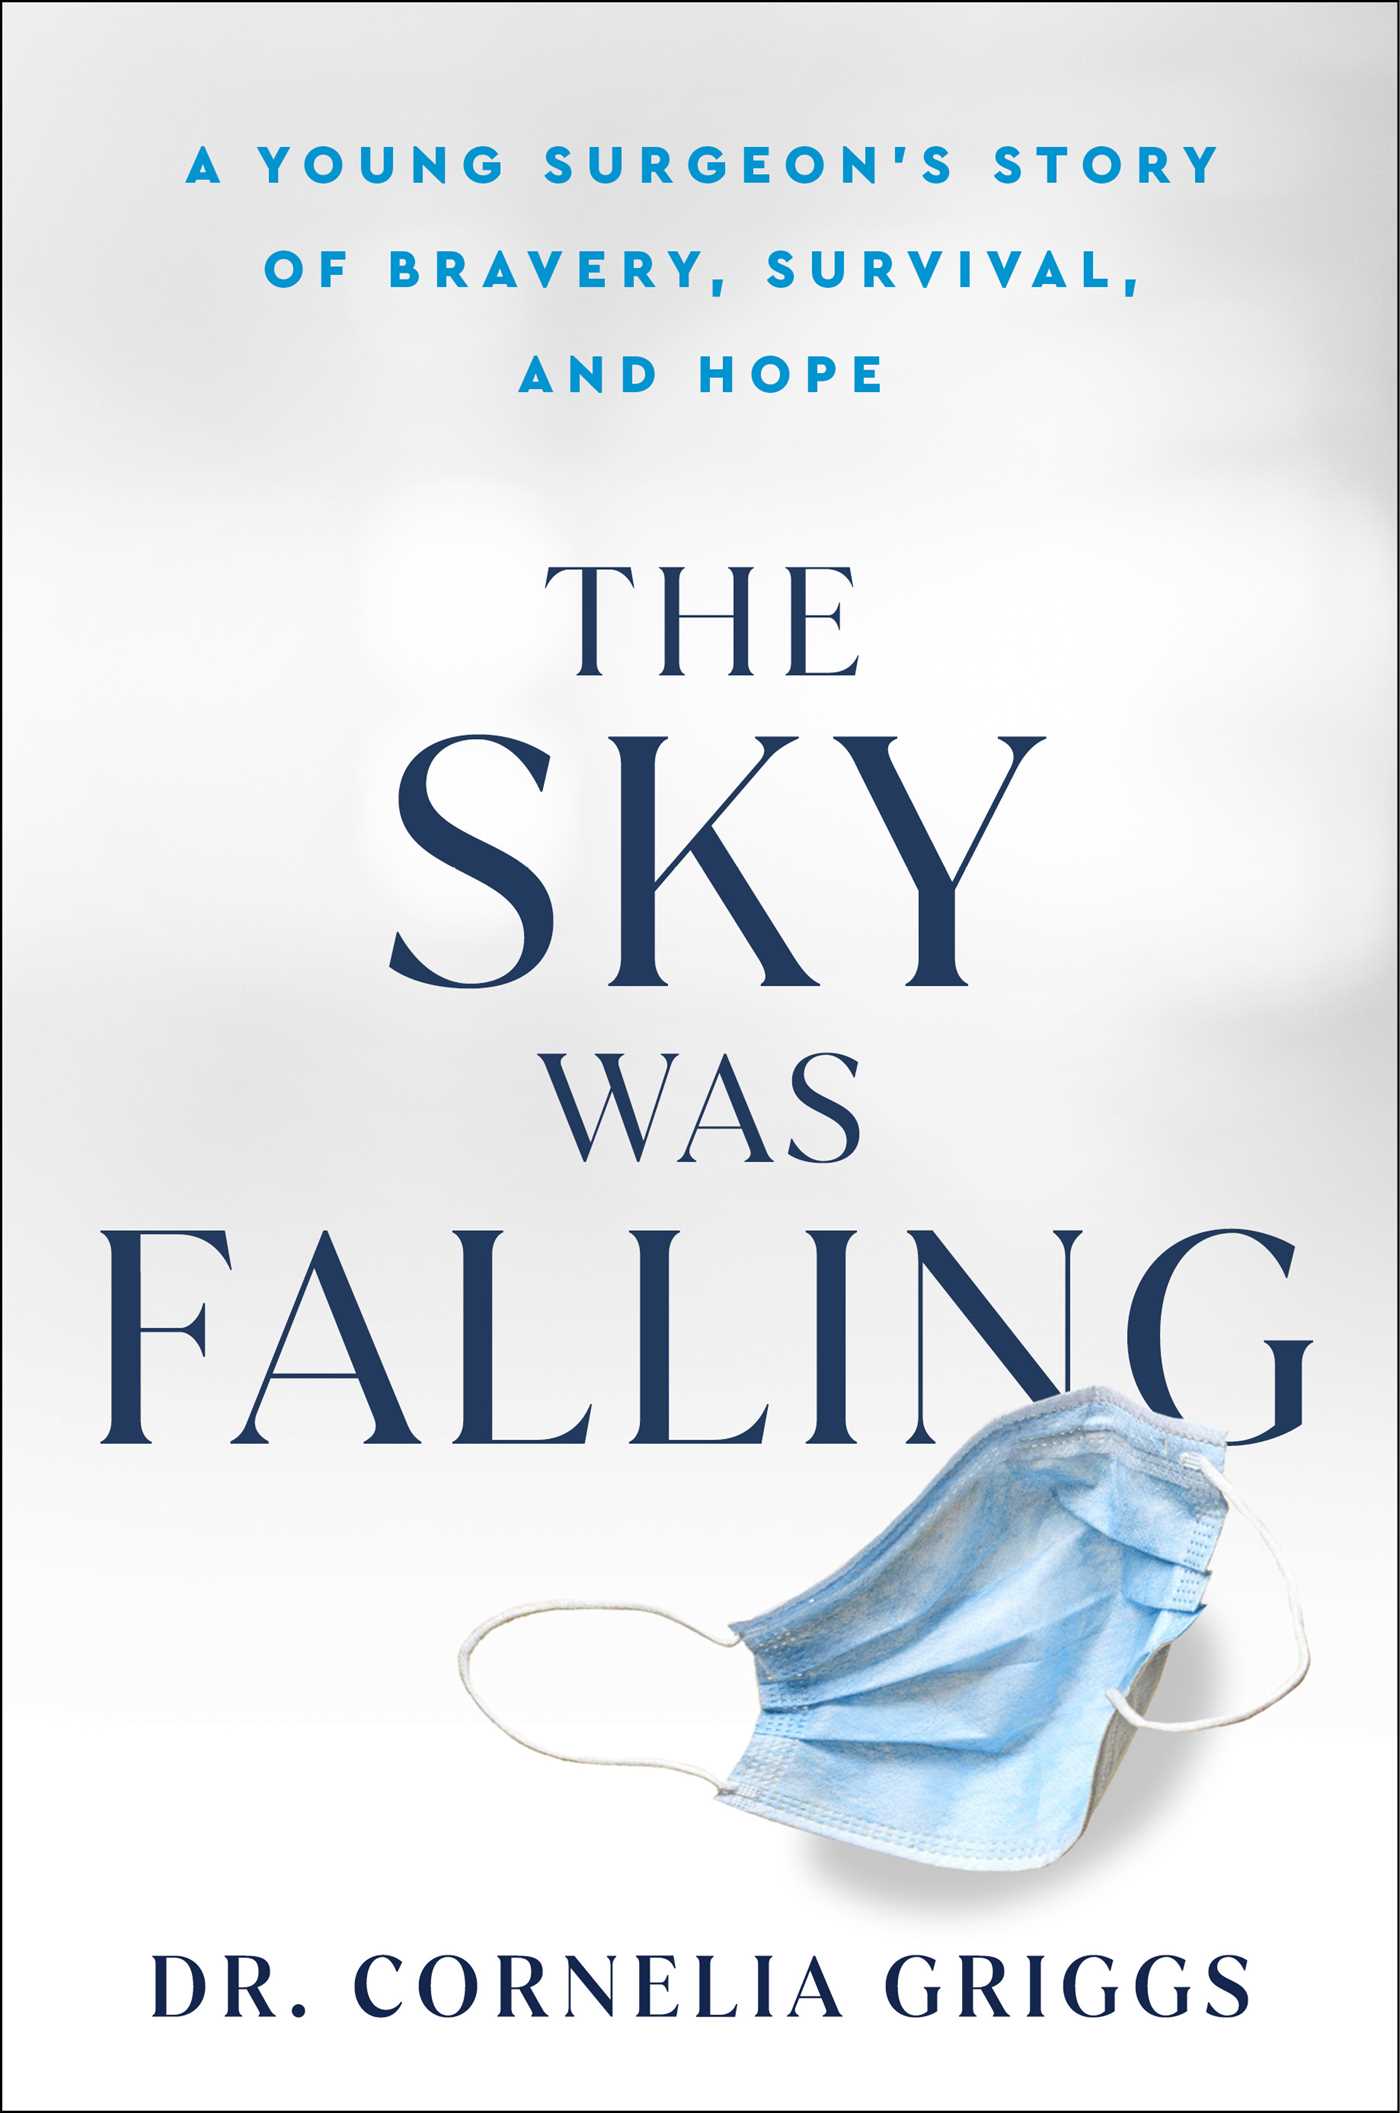 The Sky Was Falling: A Young Surgeon's Story of Bravery, Survival, and Hope